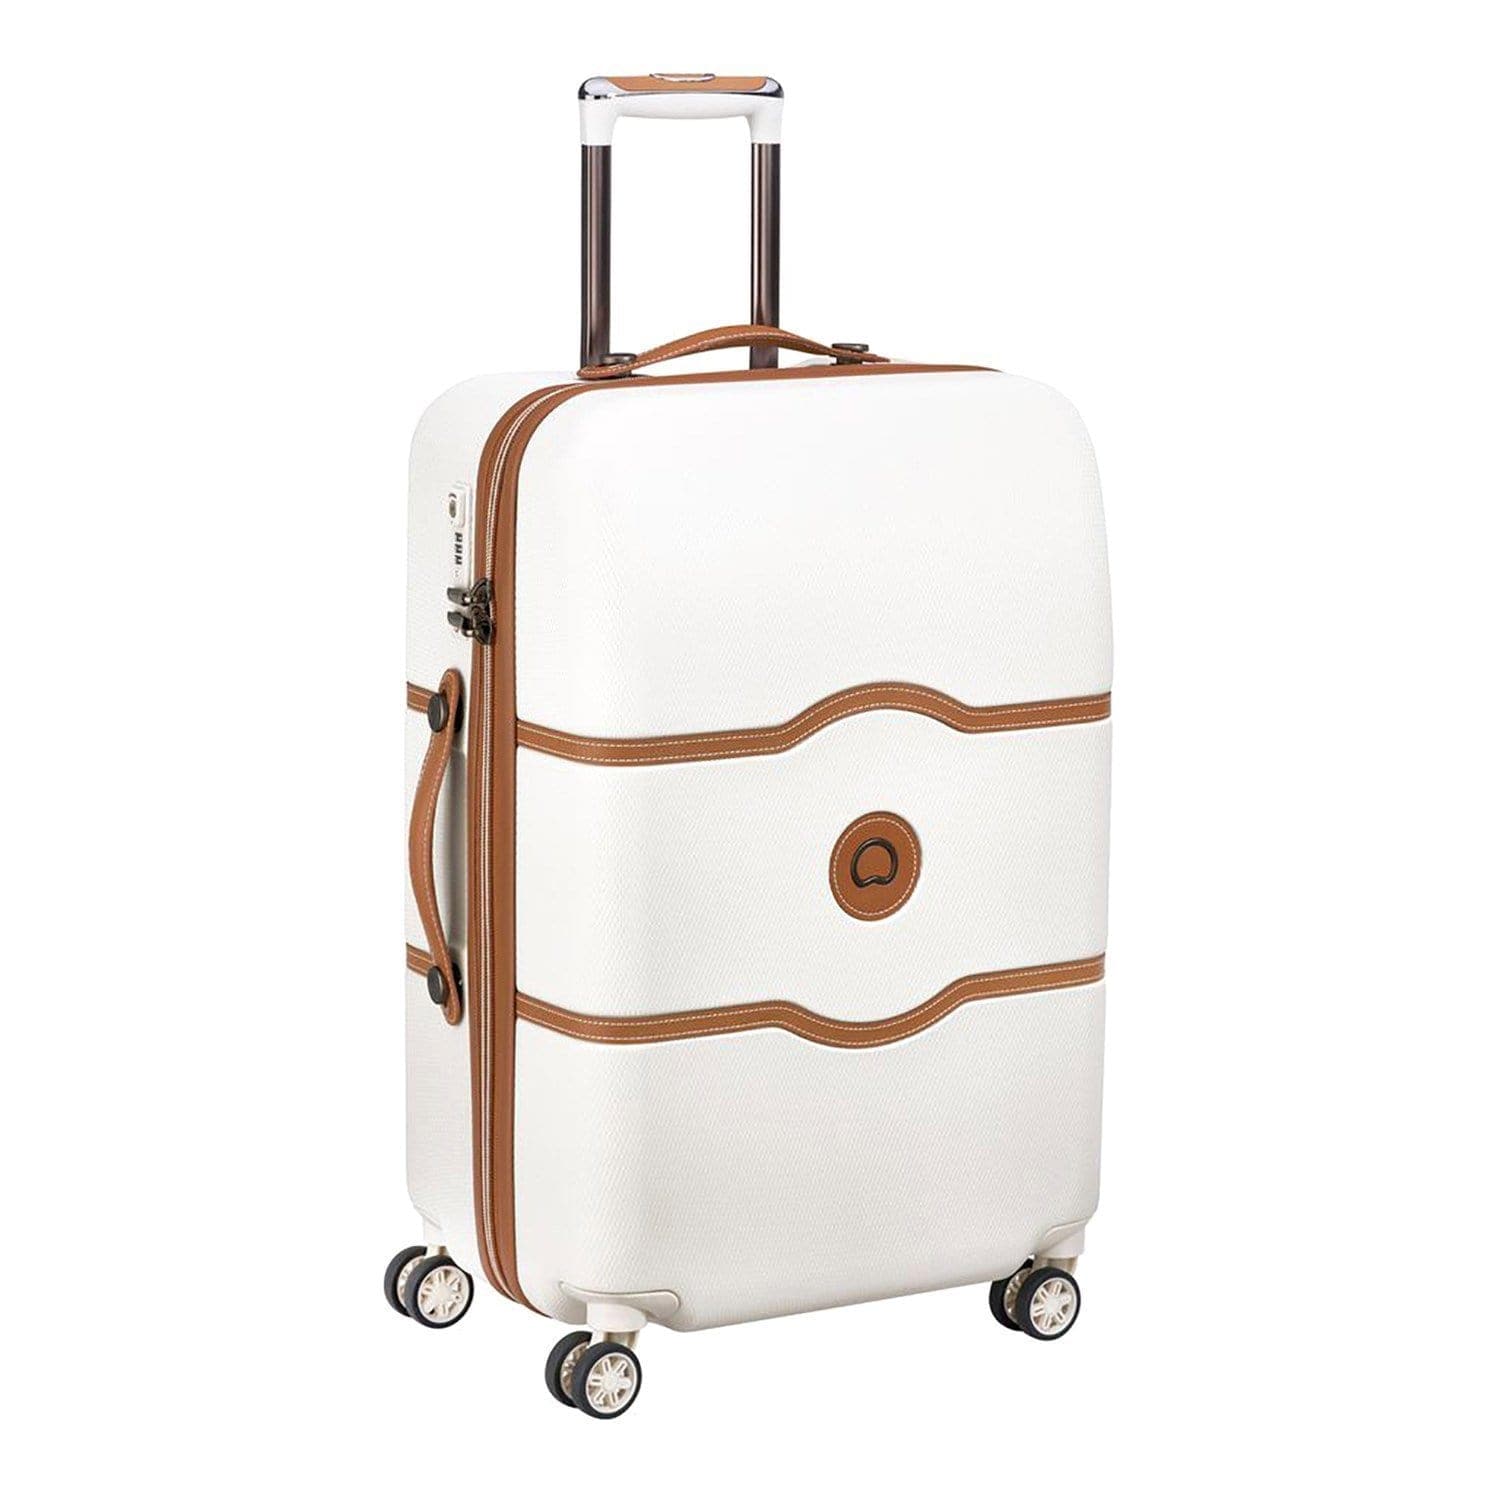 Delsey Chatelet Air 4 Double Wheel Cabin Trolley Case - Angora - 00167281015 ANGORA - Jashanmal Home